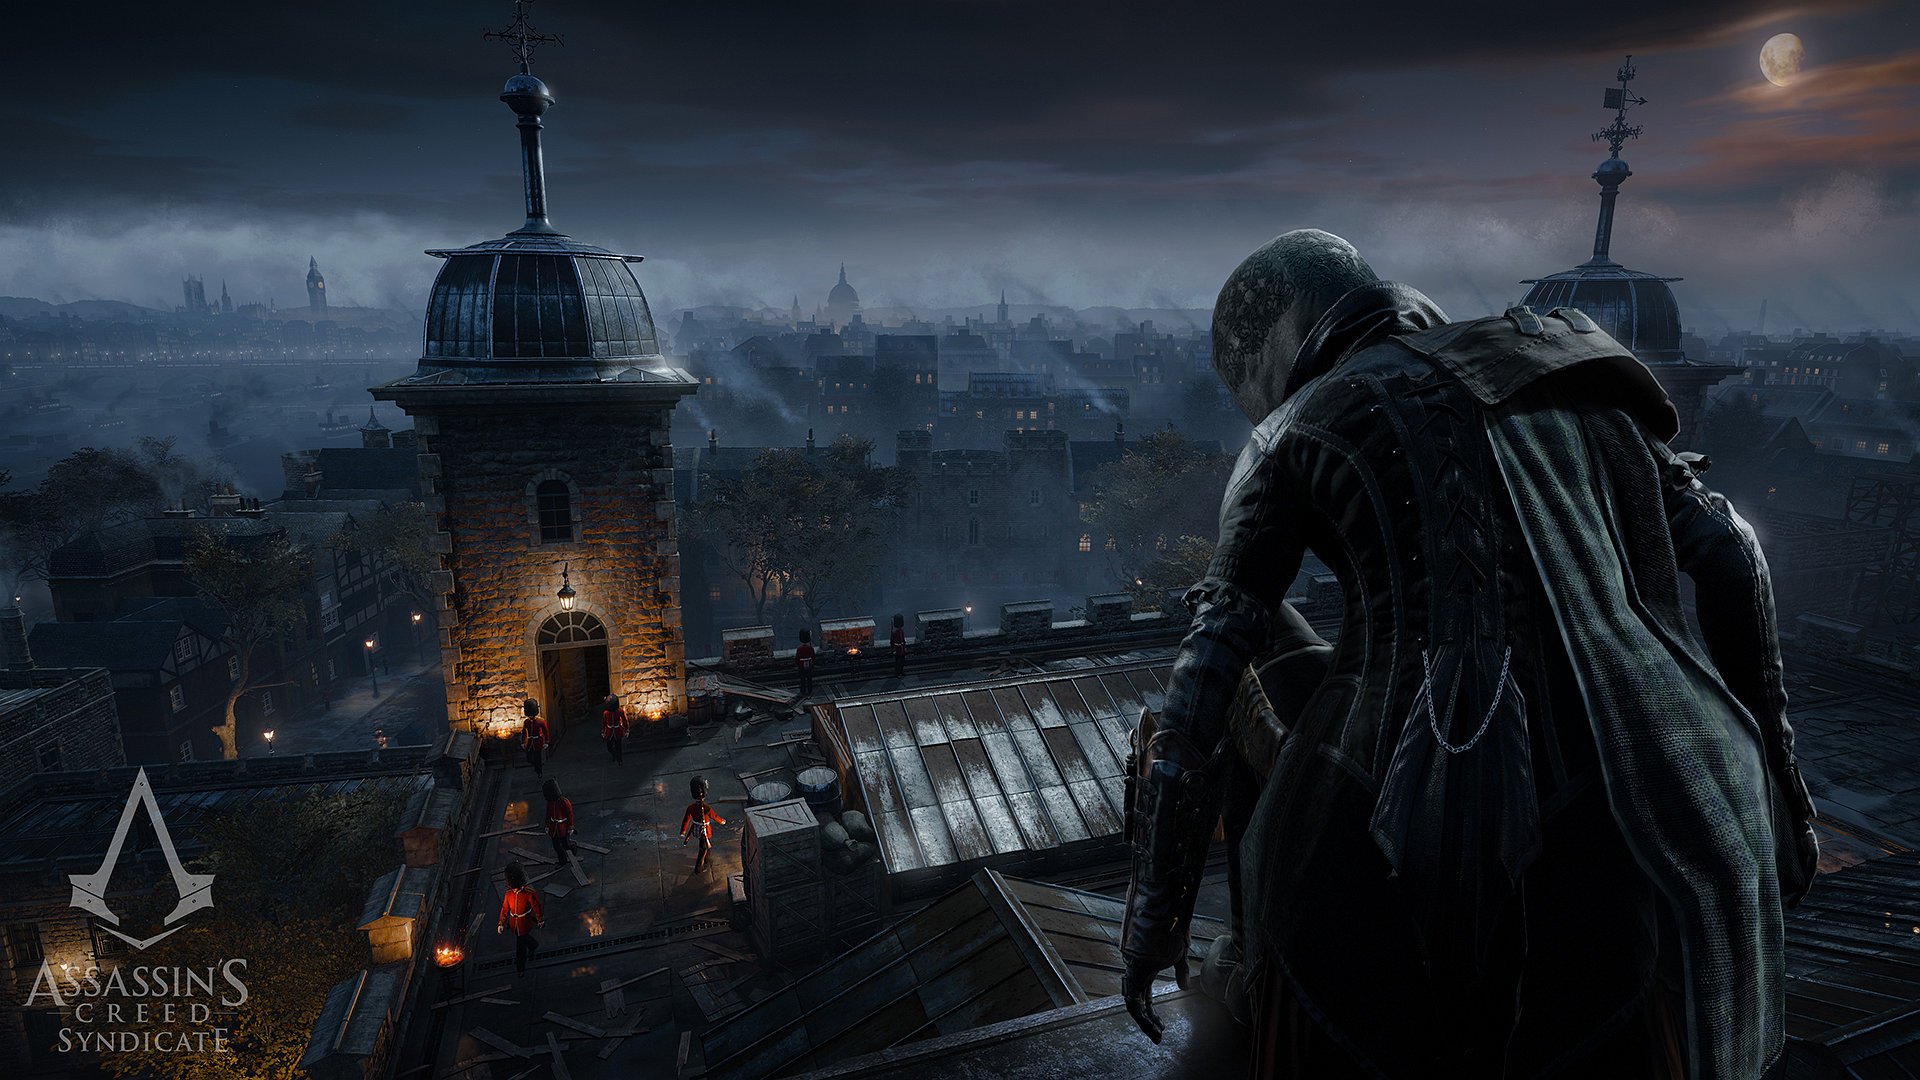 assassin's creed: syndicate, video game, evie frye, assassin's creed